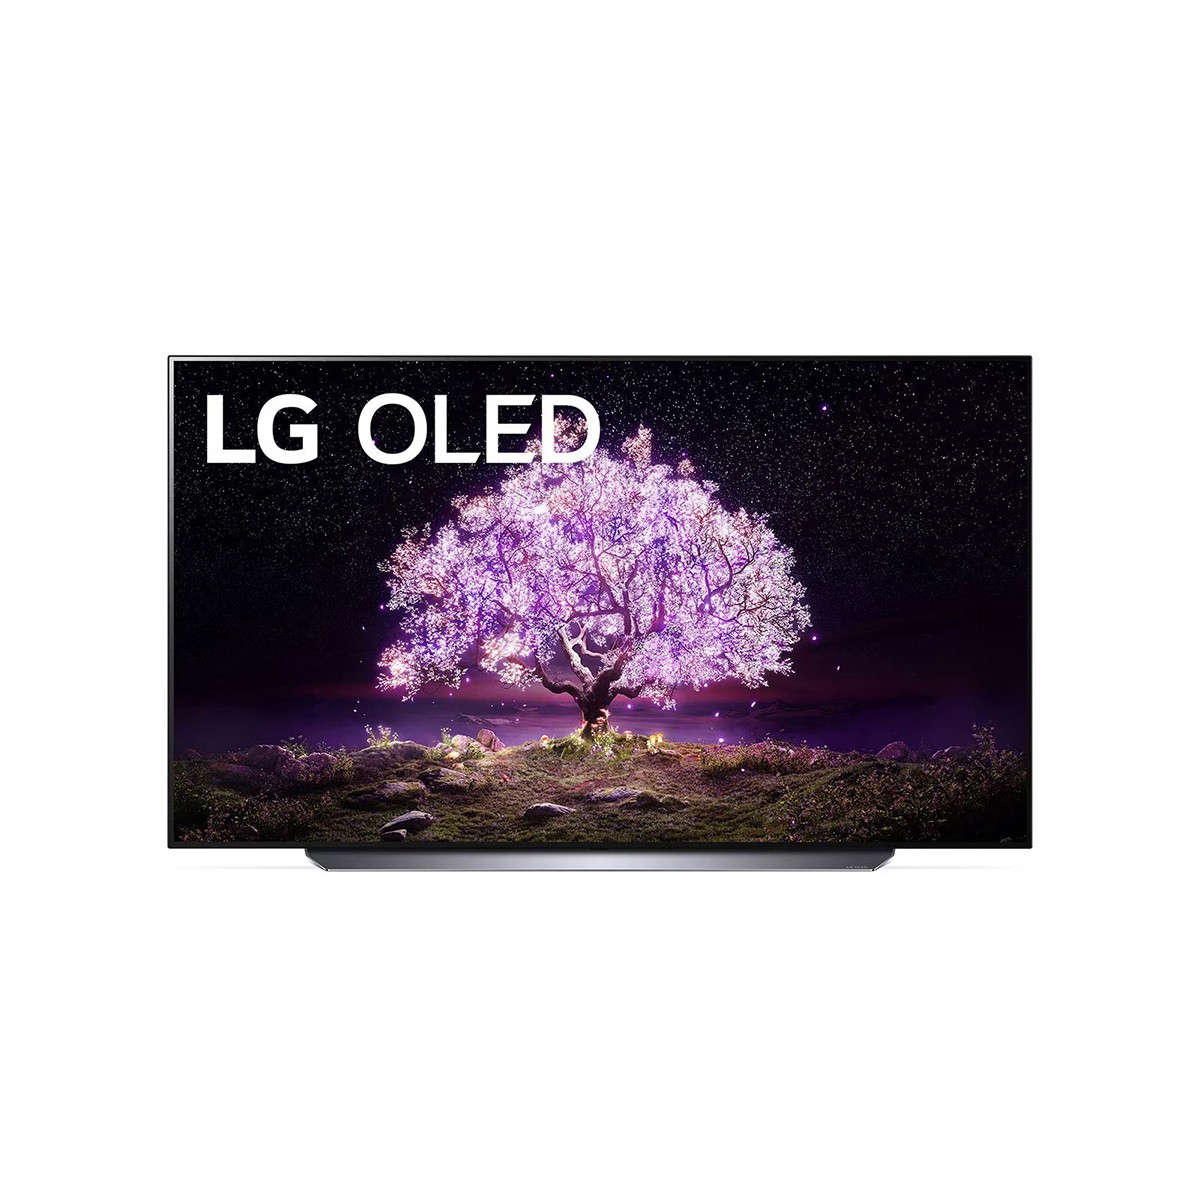 LG OLED HDR 4K Ultra HD Smart TV, 65 inch with Freeview Play/Freesat HD & Dolby Atmos, Black